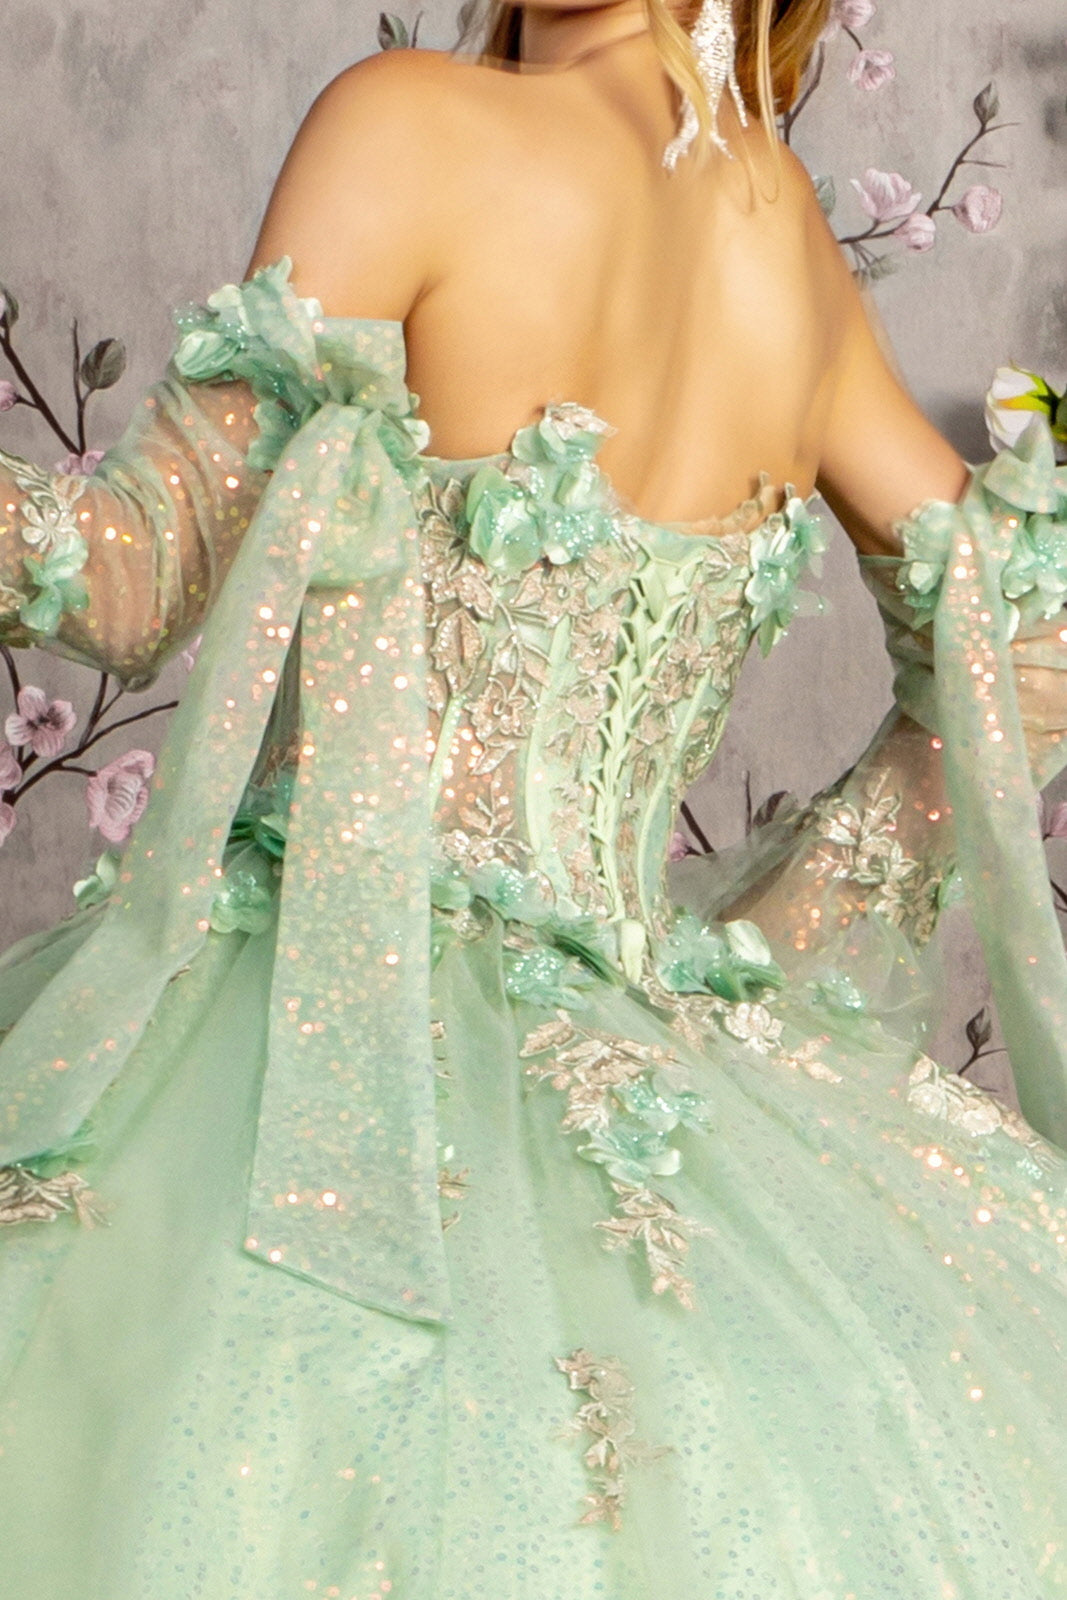 Quinceniera Dresses Jewel Quinceanera Ball Gown Sage